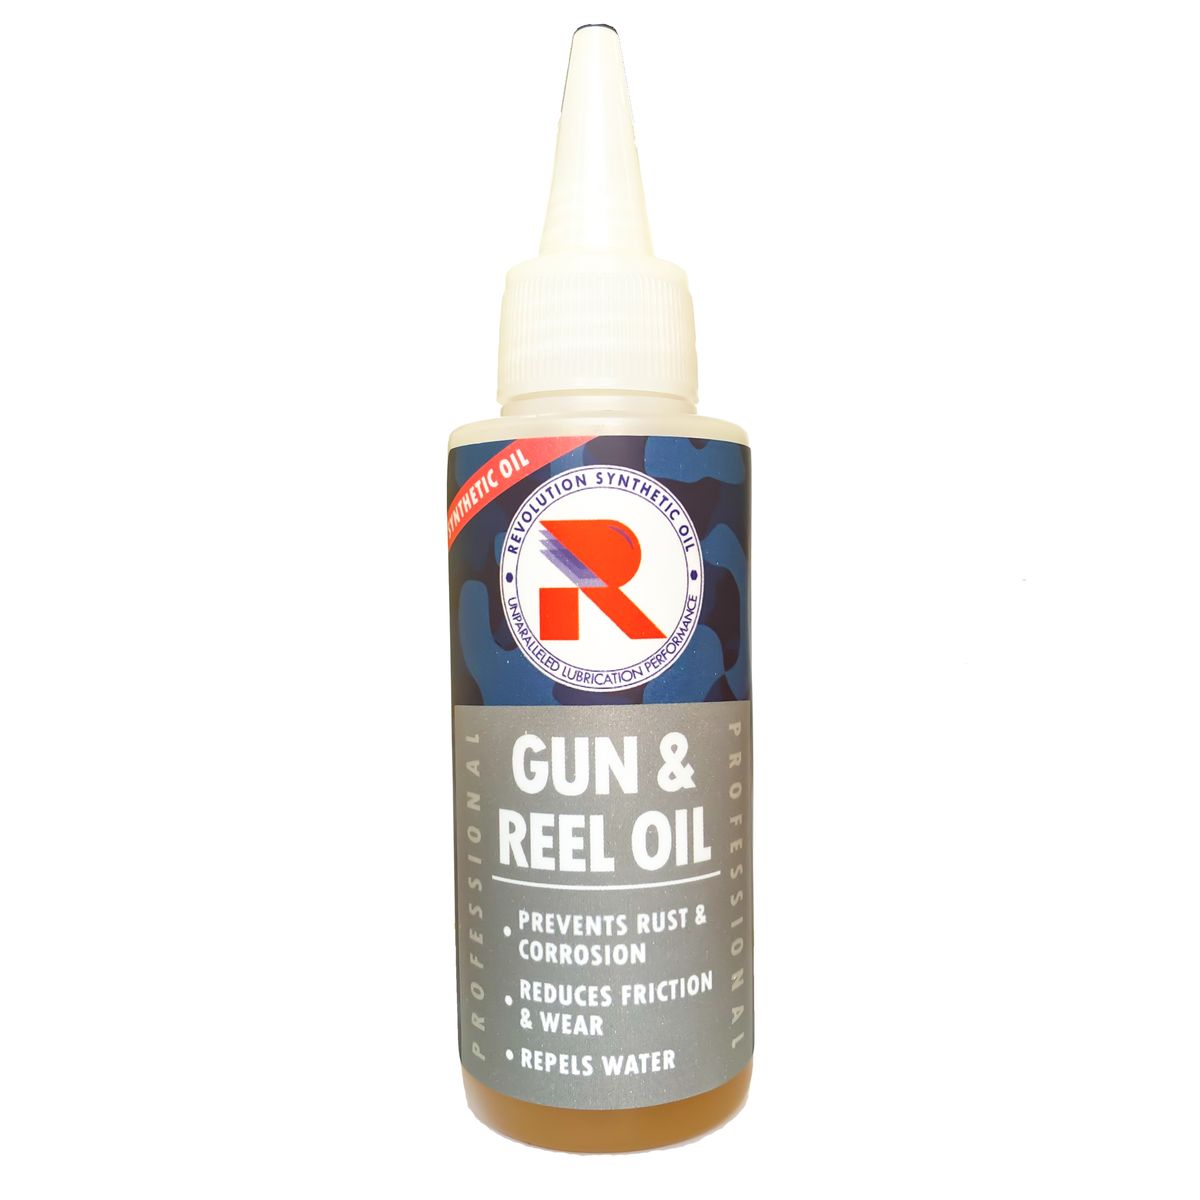 Revolution Synthetic Oil - Gun and Reel Oil, Shop Today. Get it Tomorrow!